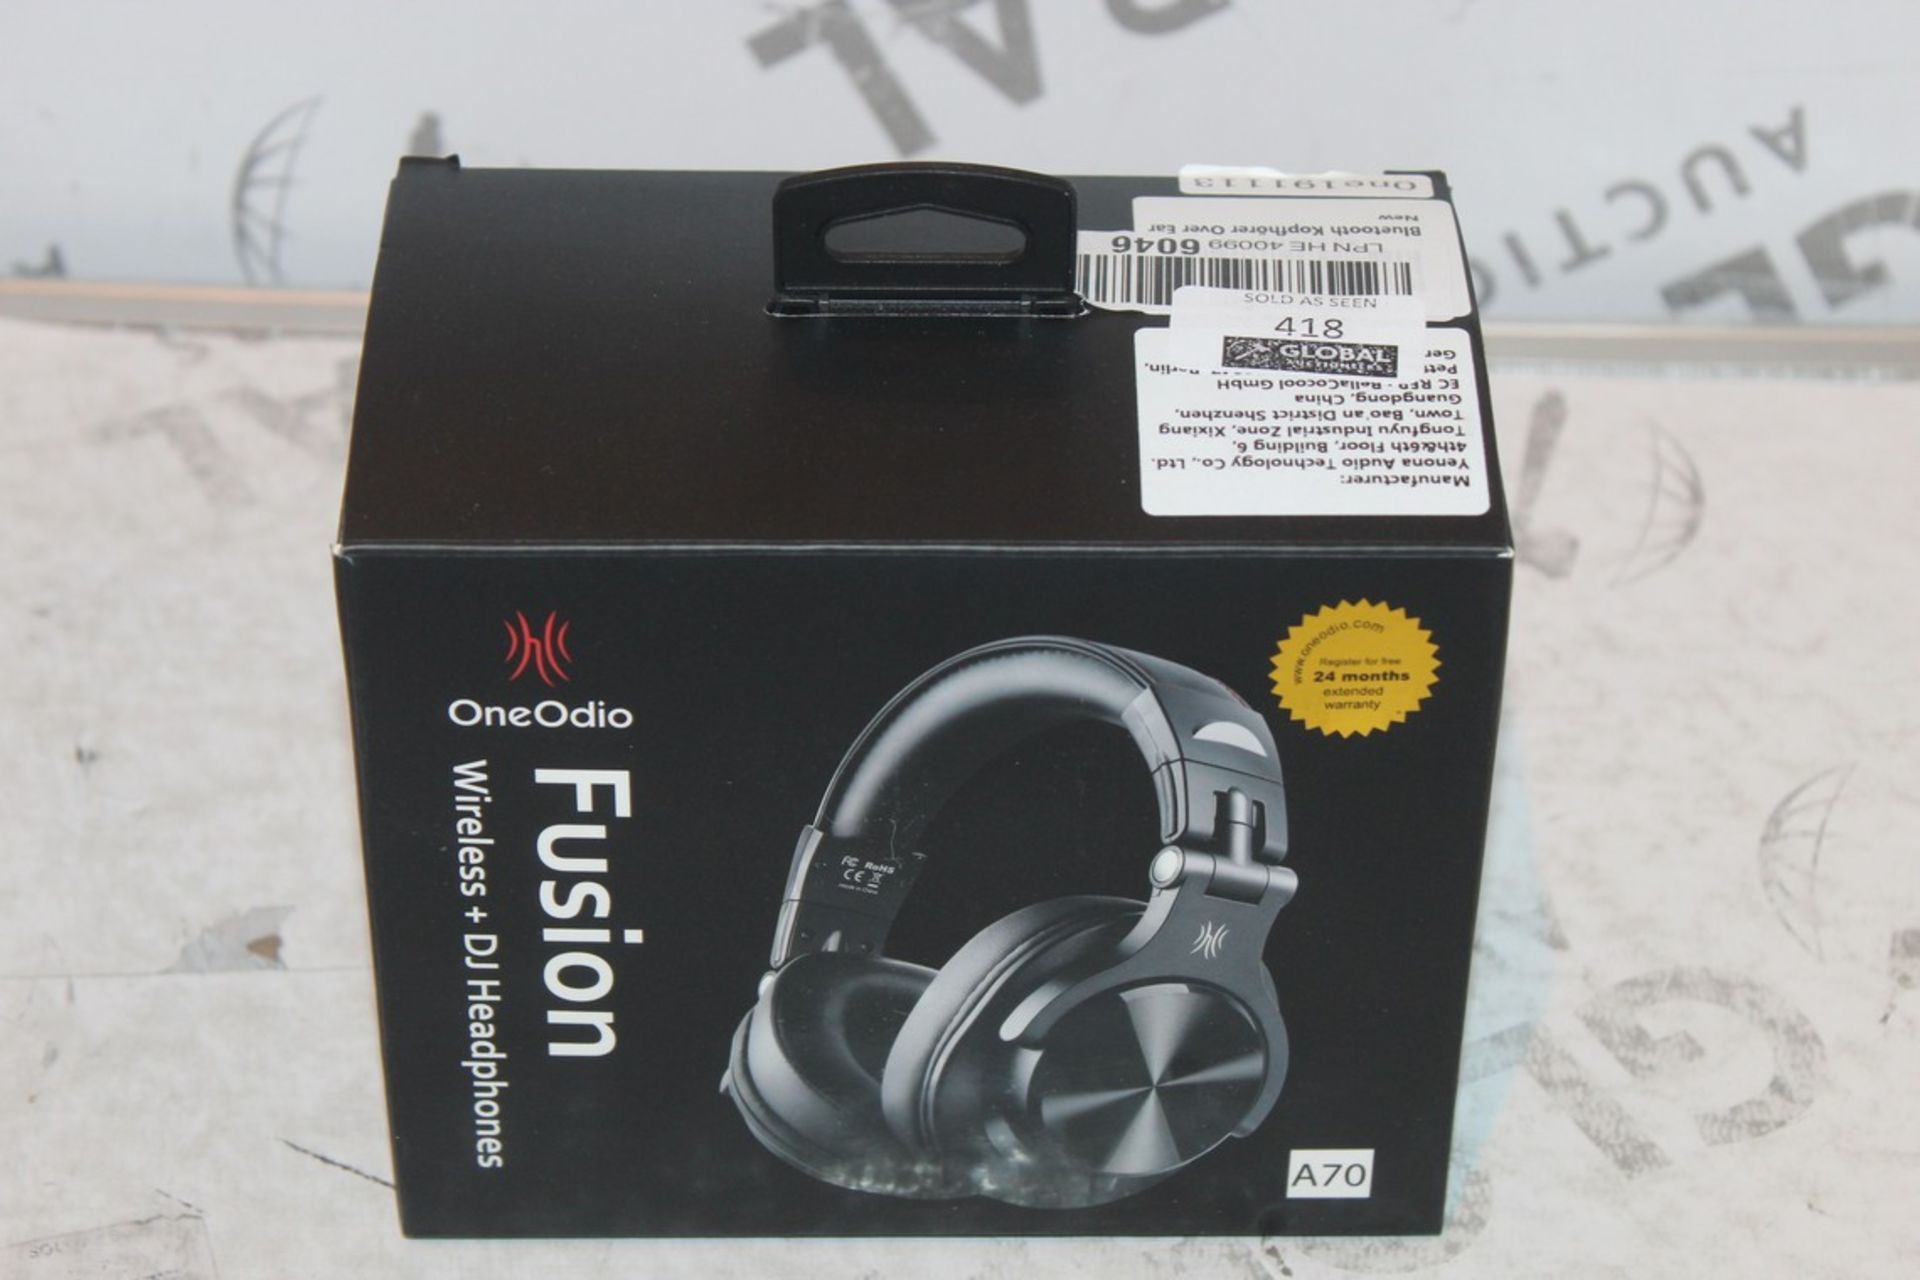 Boxed Brand New OneOdio Fusion A70 Wireless DJ Headphones in Black RRP £35